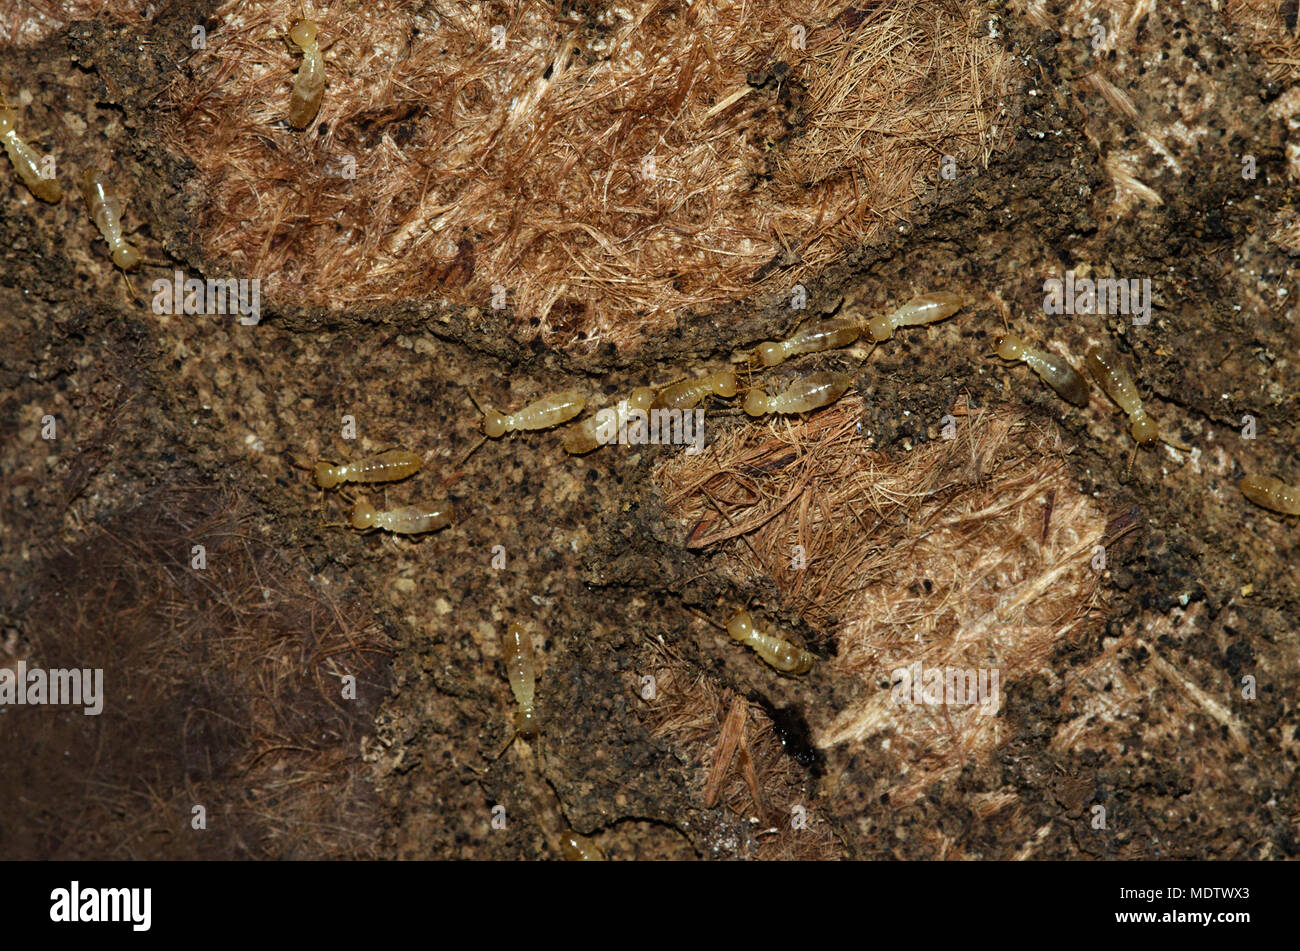 Termite workers of Kalotermes flavicollis species tunneling of an old and rotten carpet. Soft and pale colored body. Stock Photo